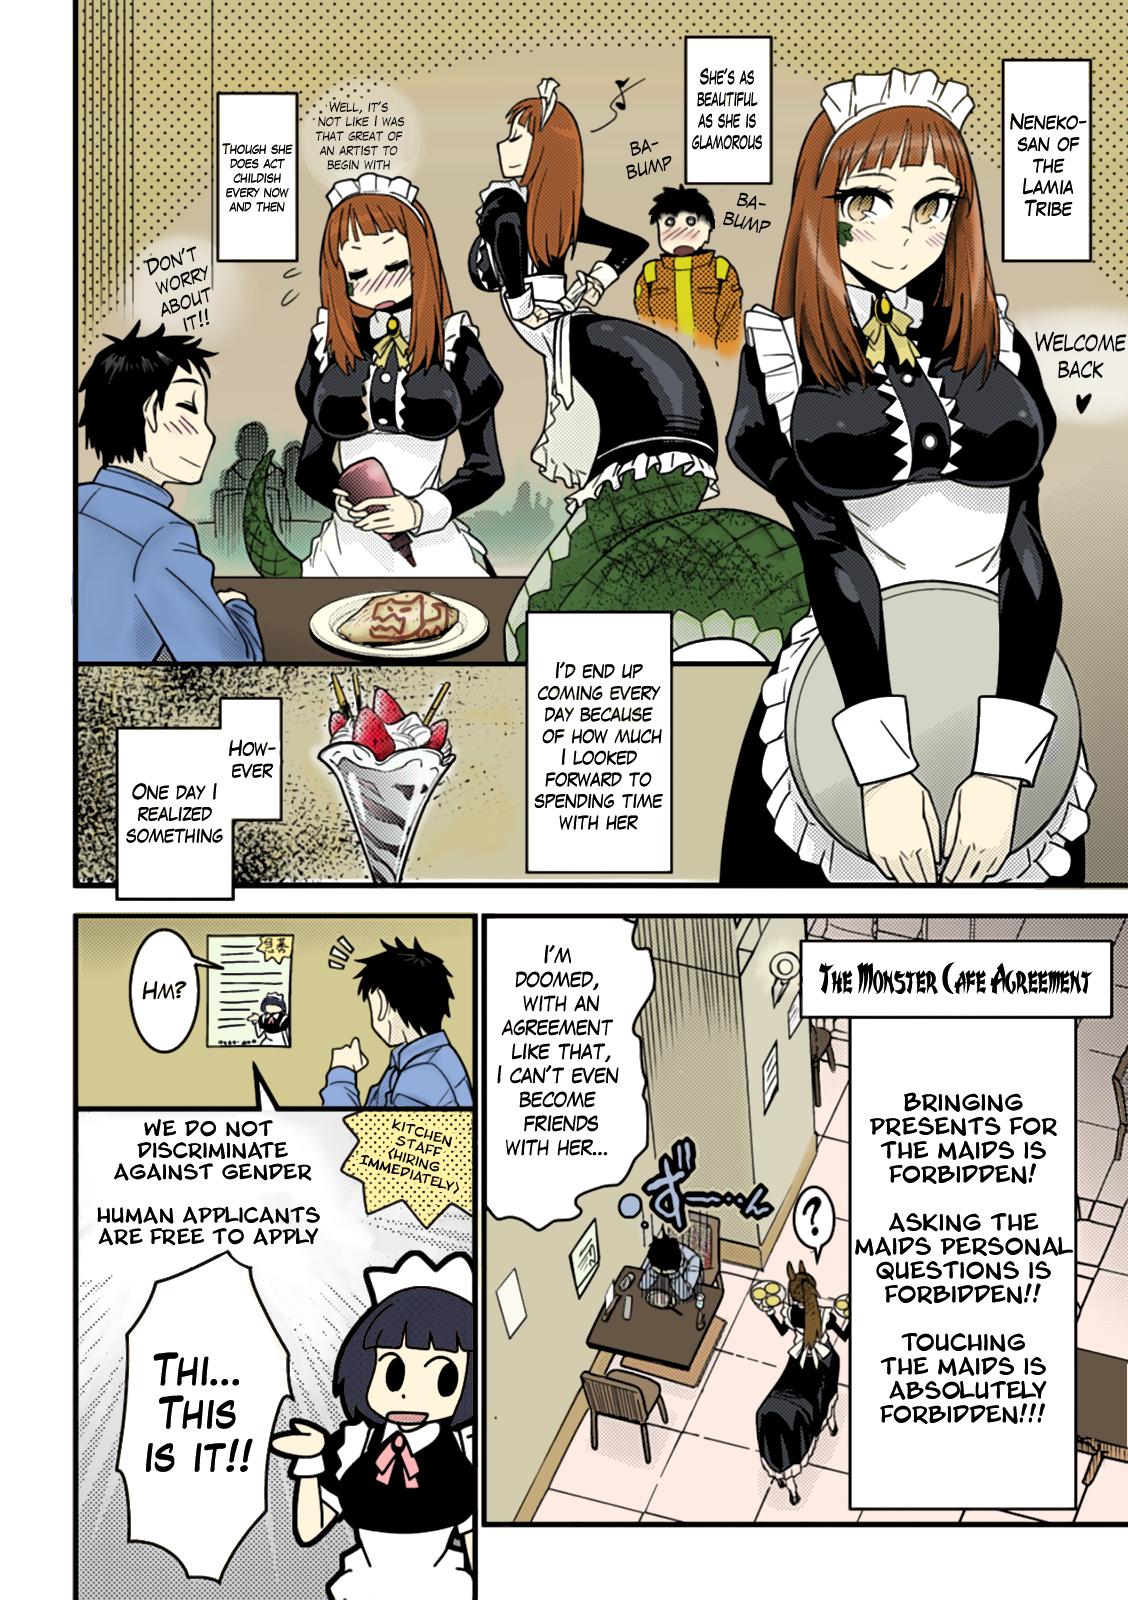 Hot Milf Mon Cafe Yori Ai o Kominute | With Love, the Monster Cafe Dad - Page 2